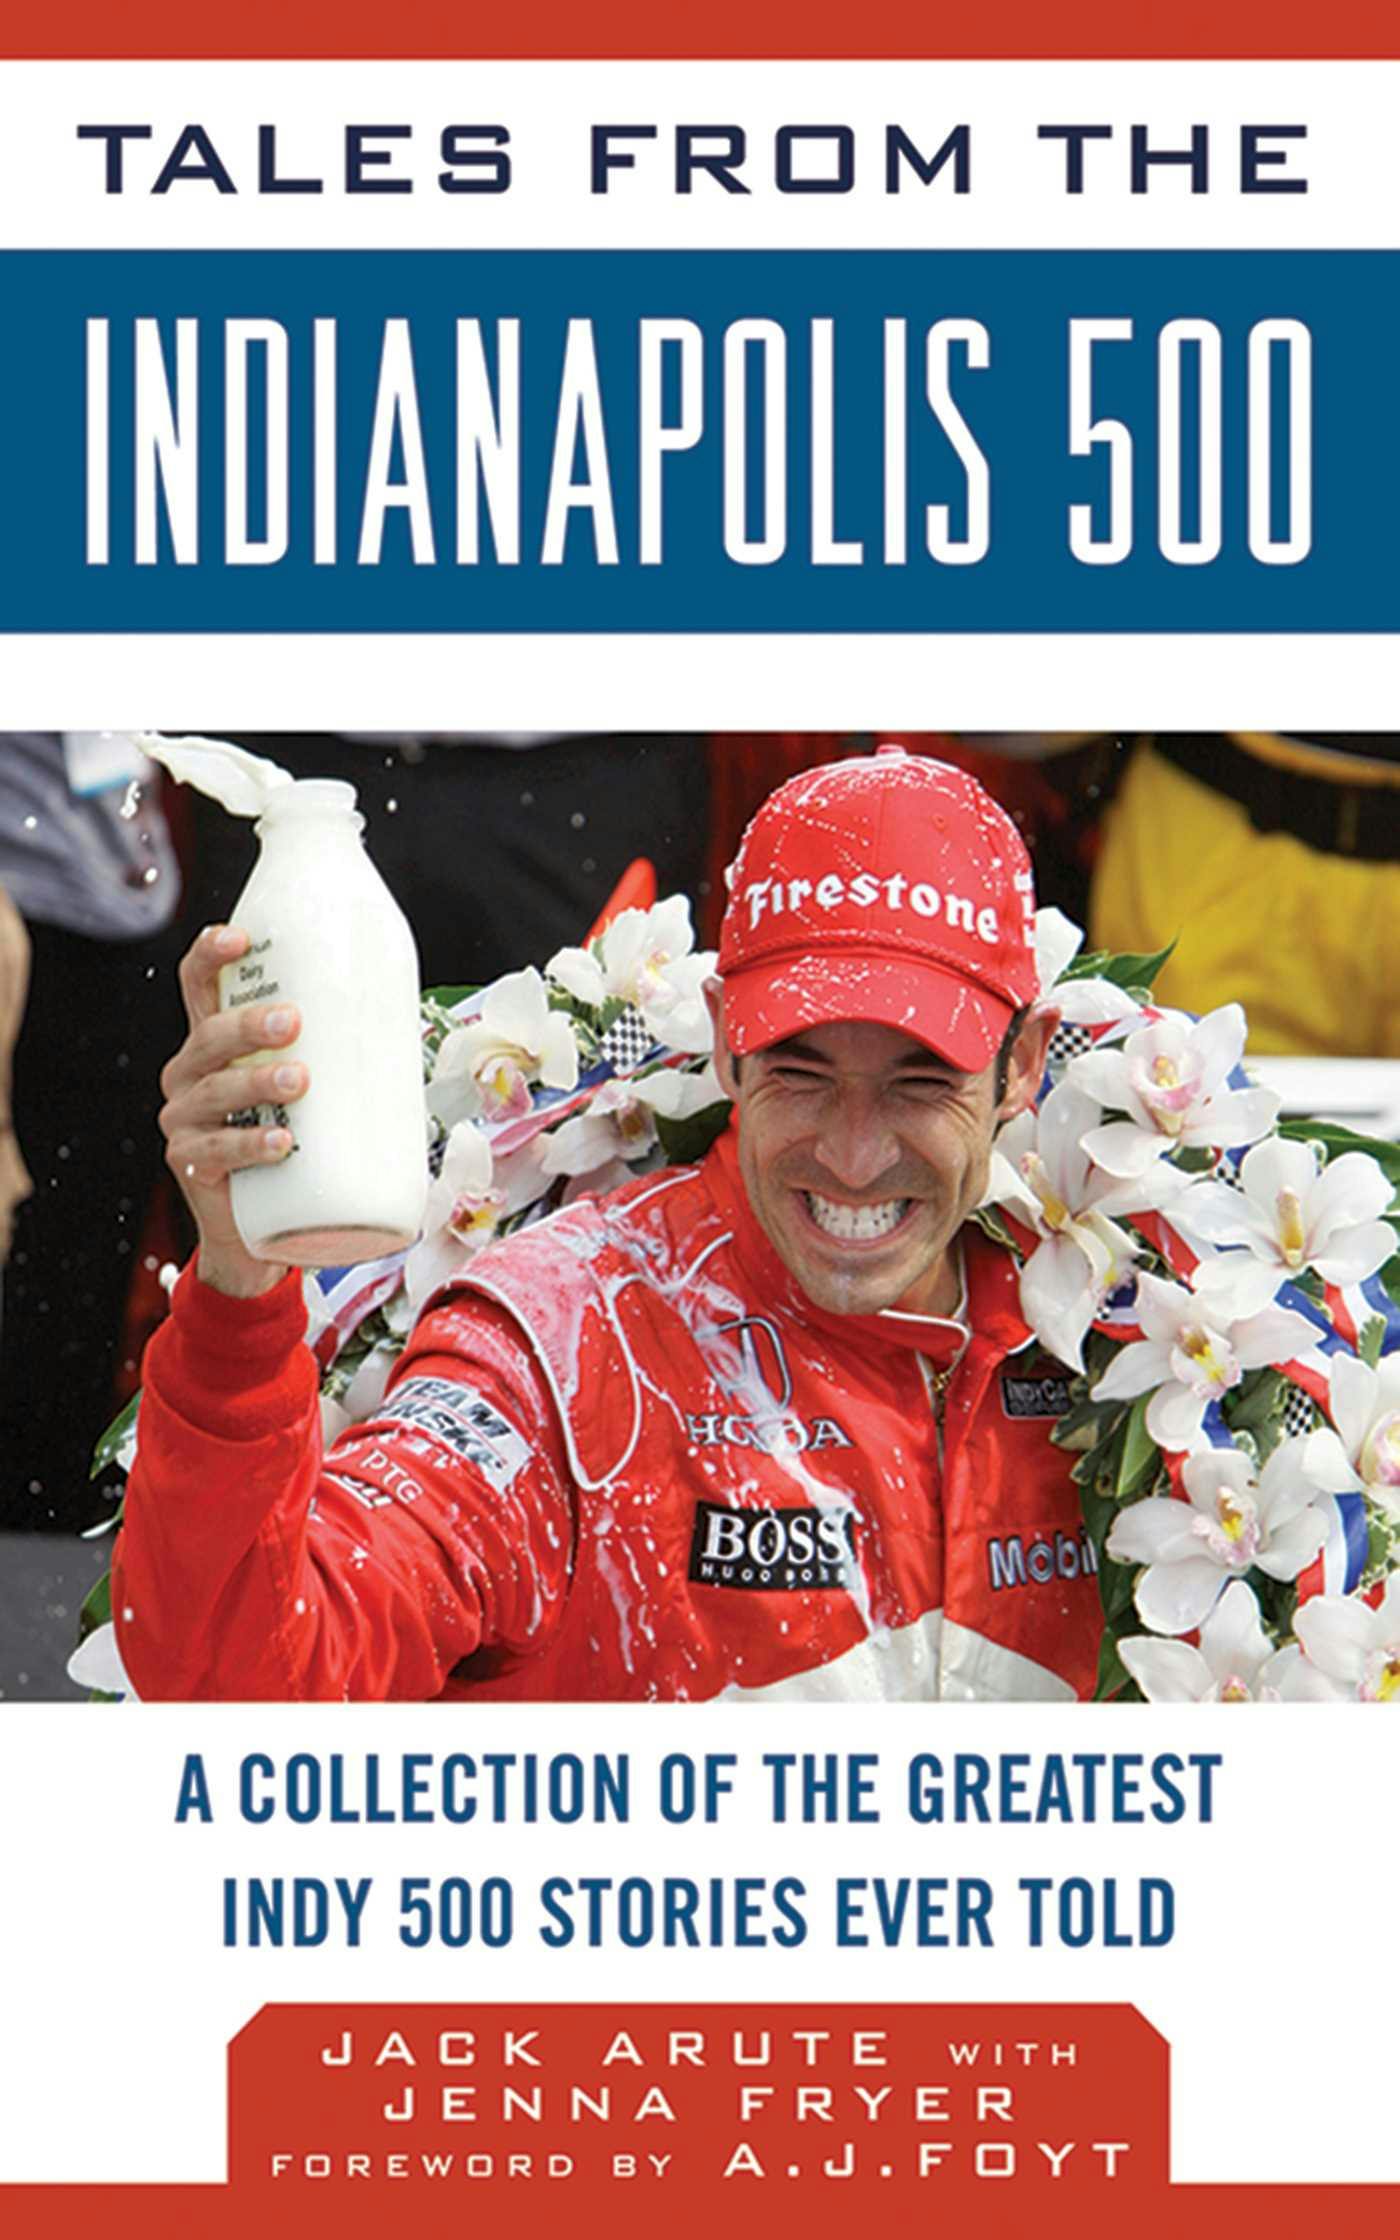 Tales from the Indianapolis 500: A Collection of the Greatest Indy 500 Stories Ever Told - Jack Arute